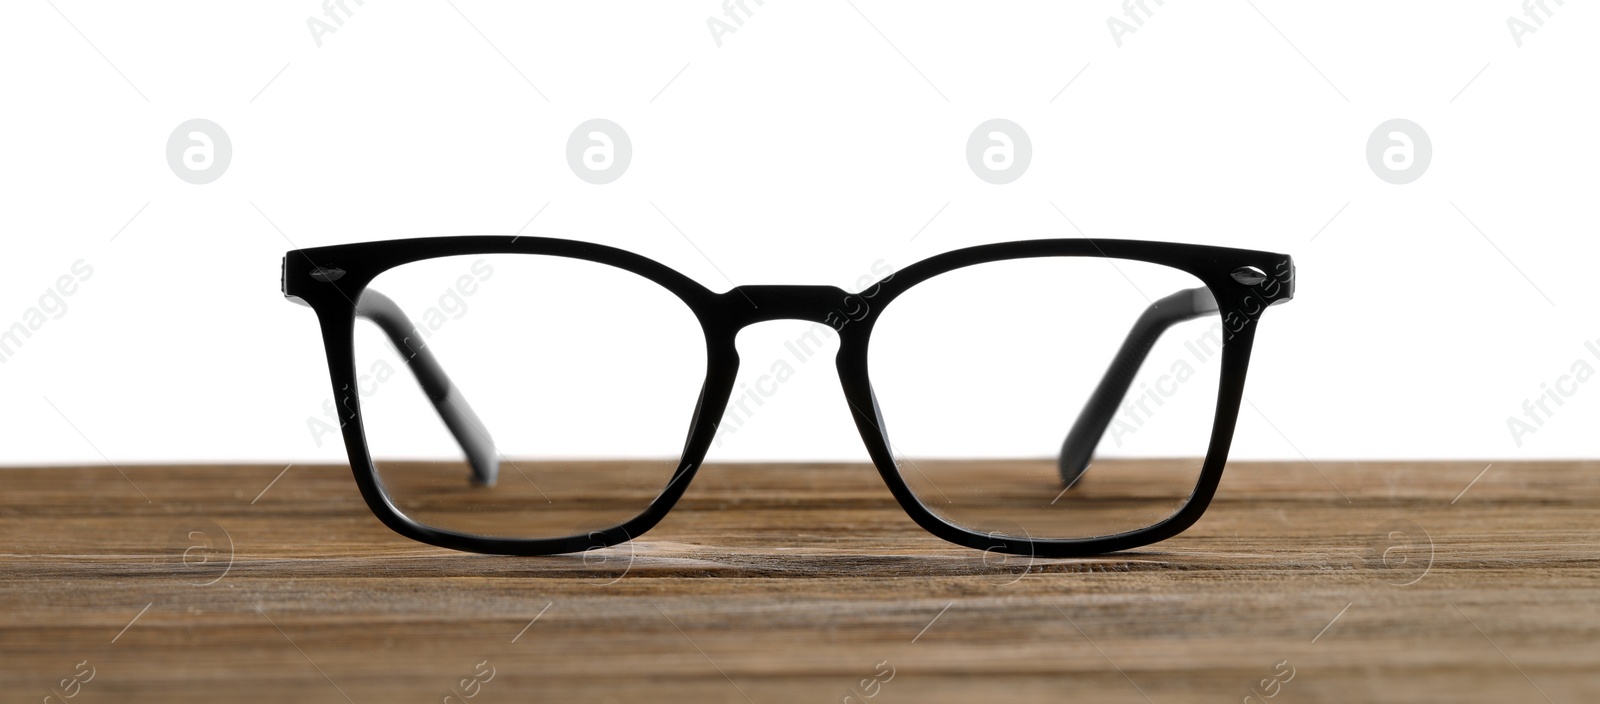 Photo of Stylish glasses with black frame on wooden table against white background